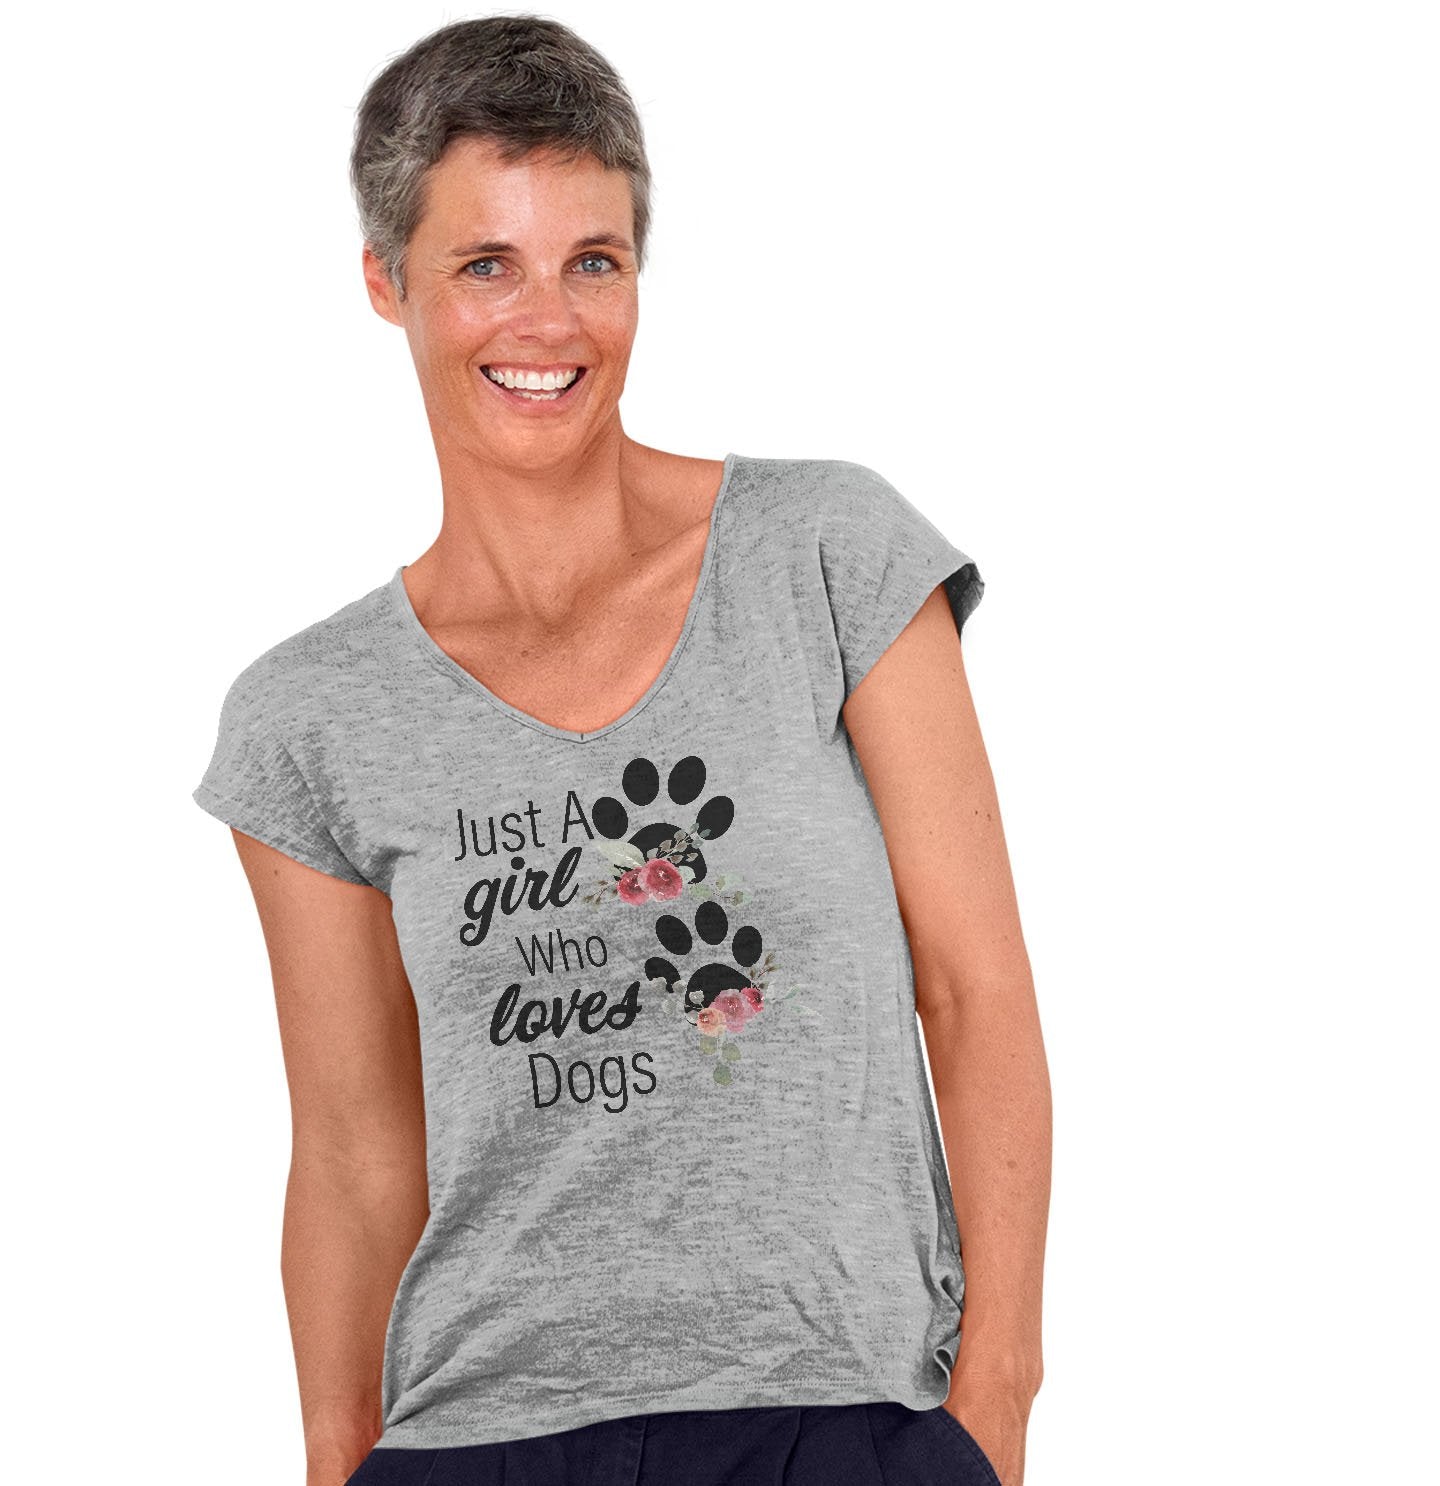 Just A Girl Who Loves Dogs - Ladies' V-Neck T-Shirt